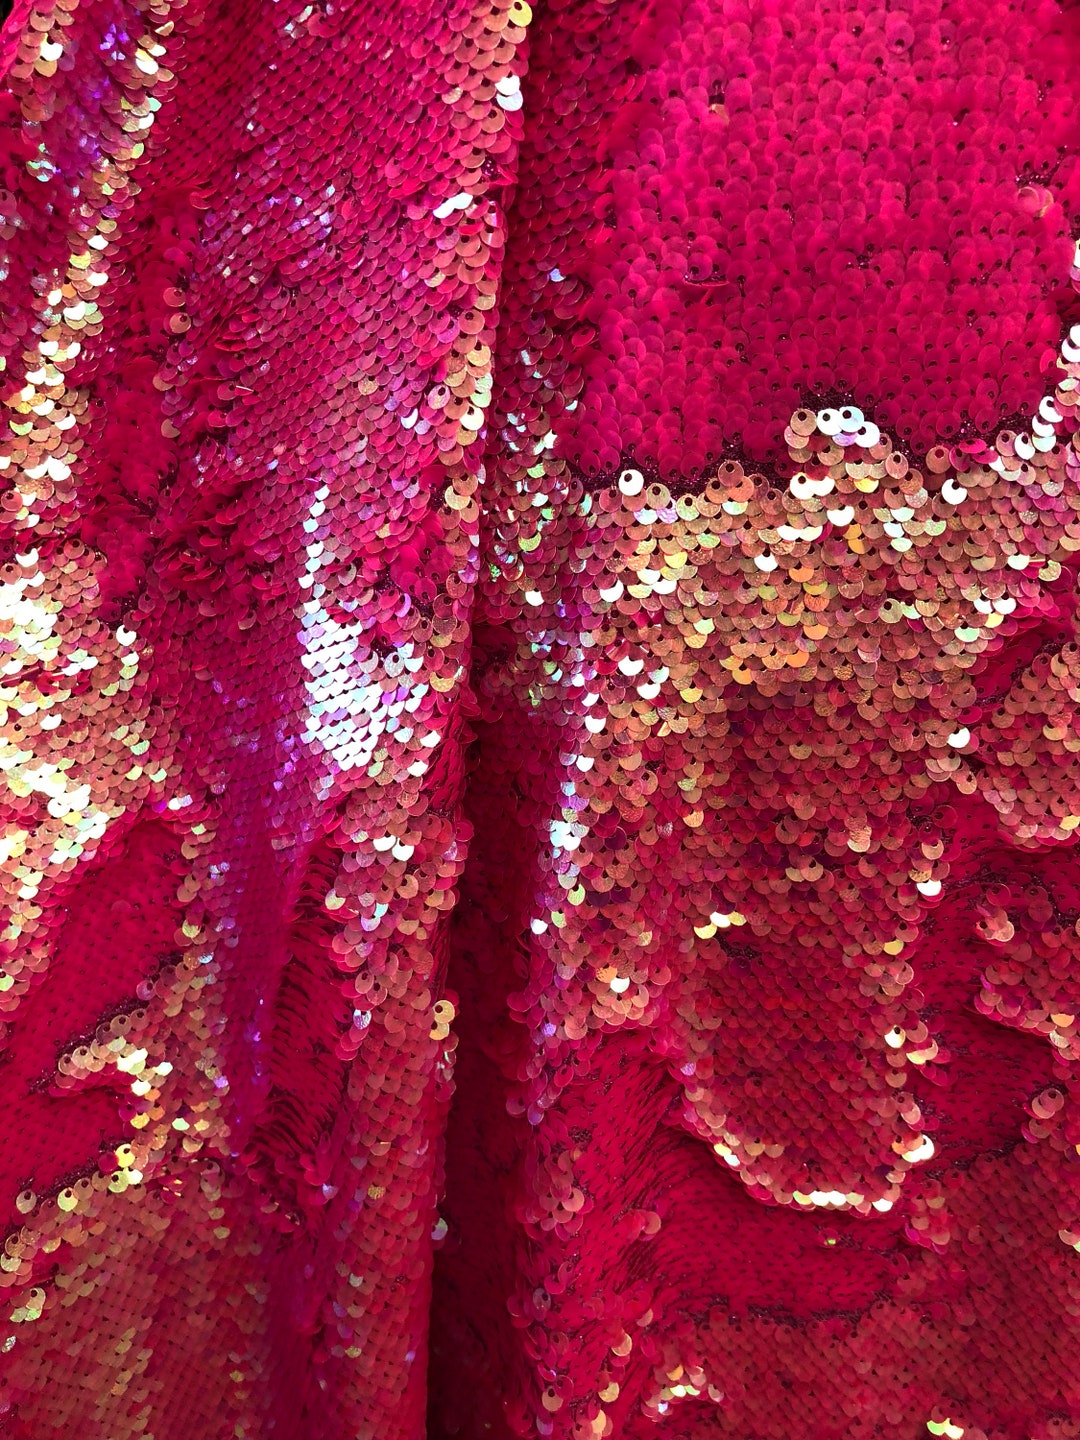 New Mermaid Sequins With Metallic Foil Stretch Base Neon Pink - Etsy